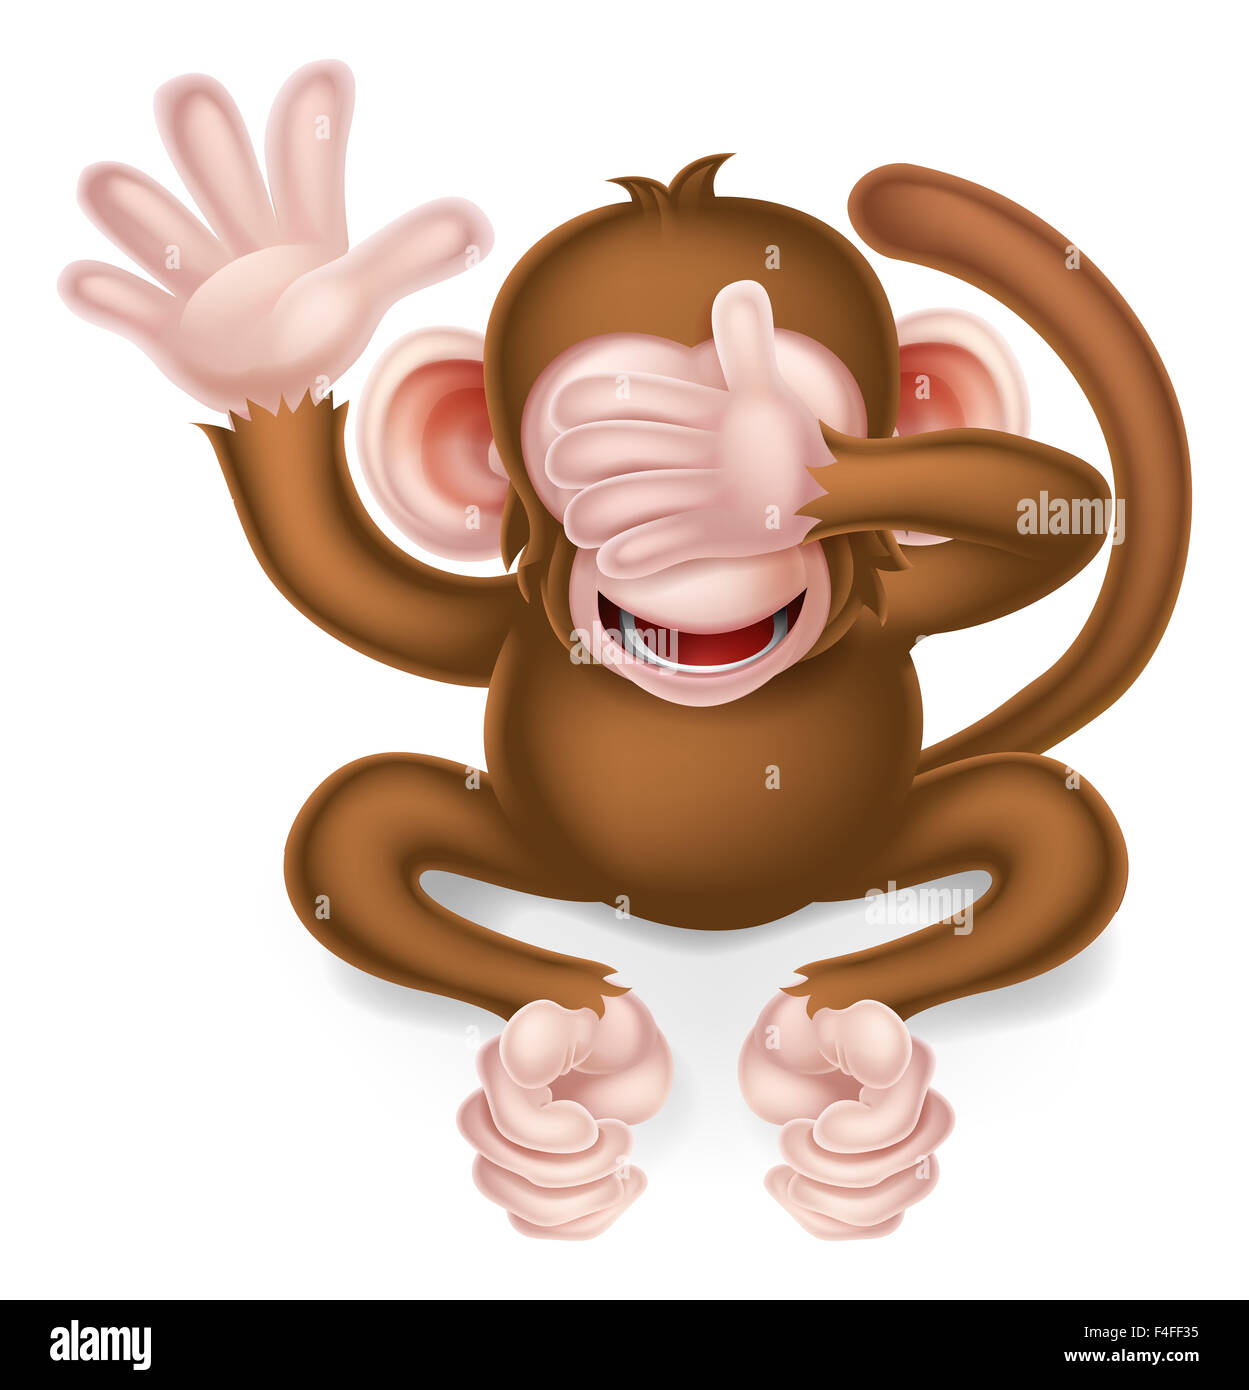 See no evil cartoon wise monkey covering his eyes Stock Photo